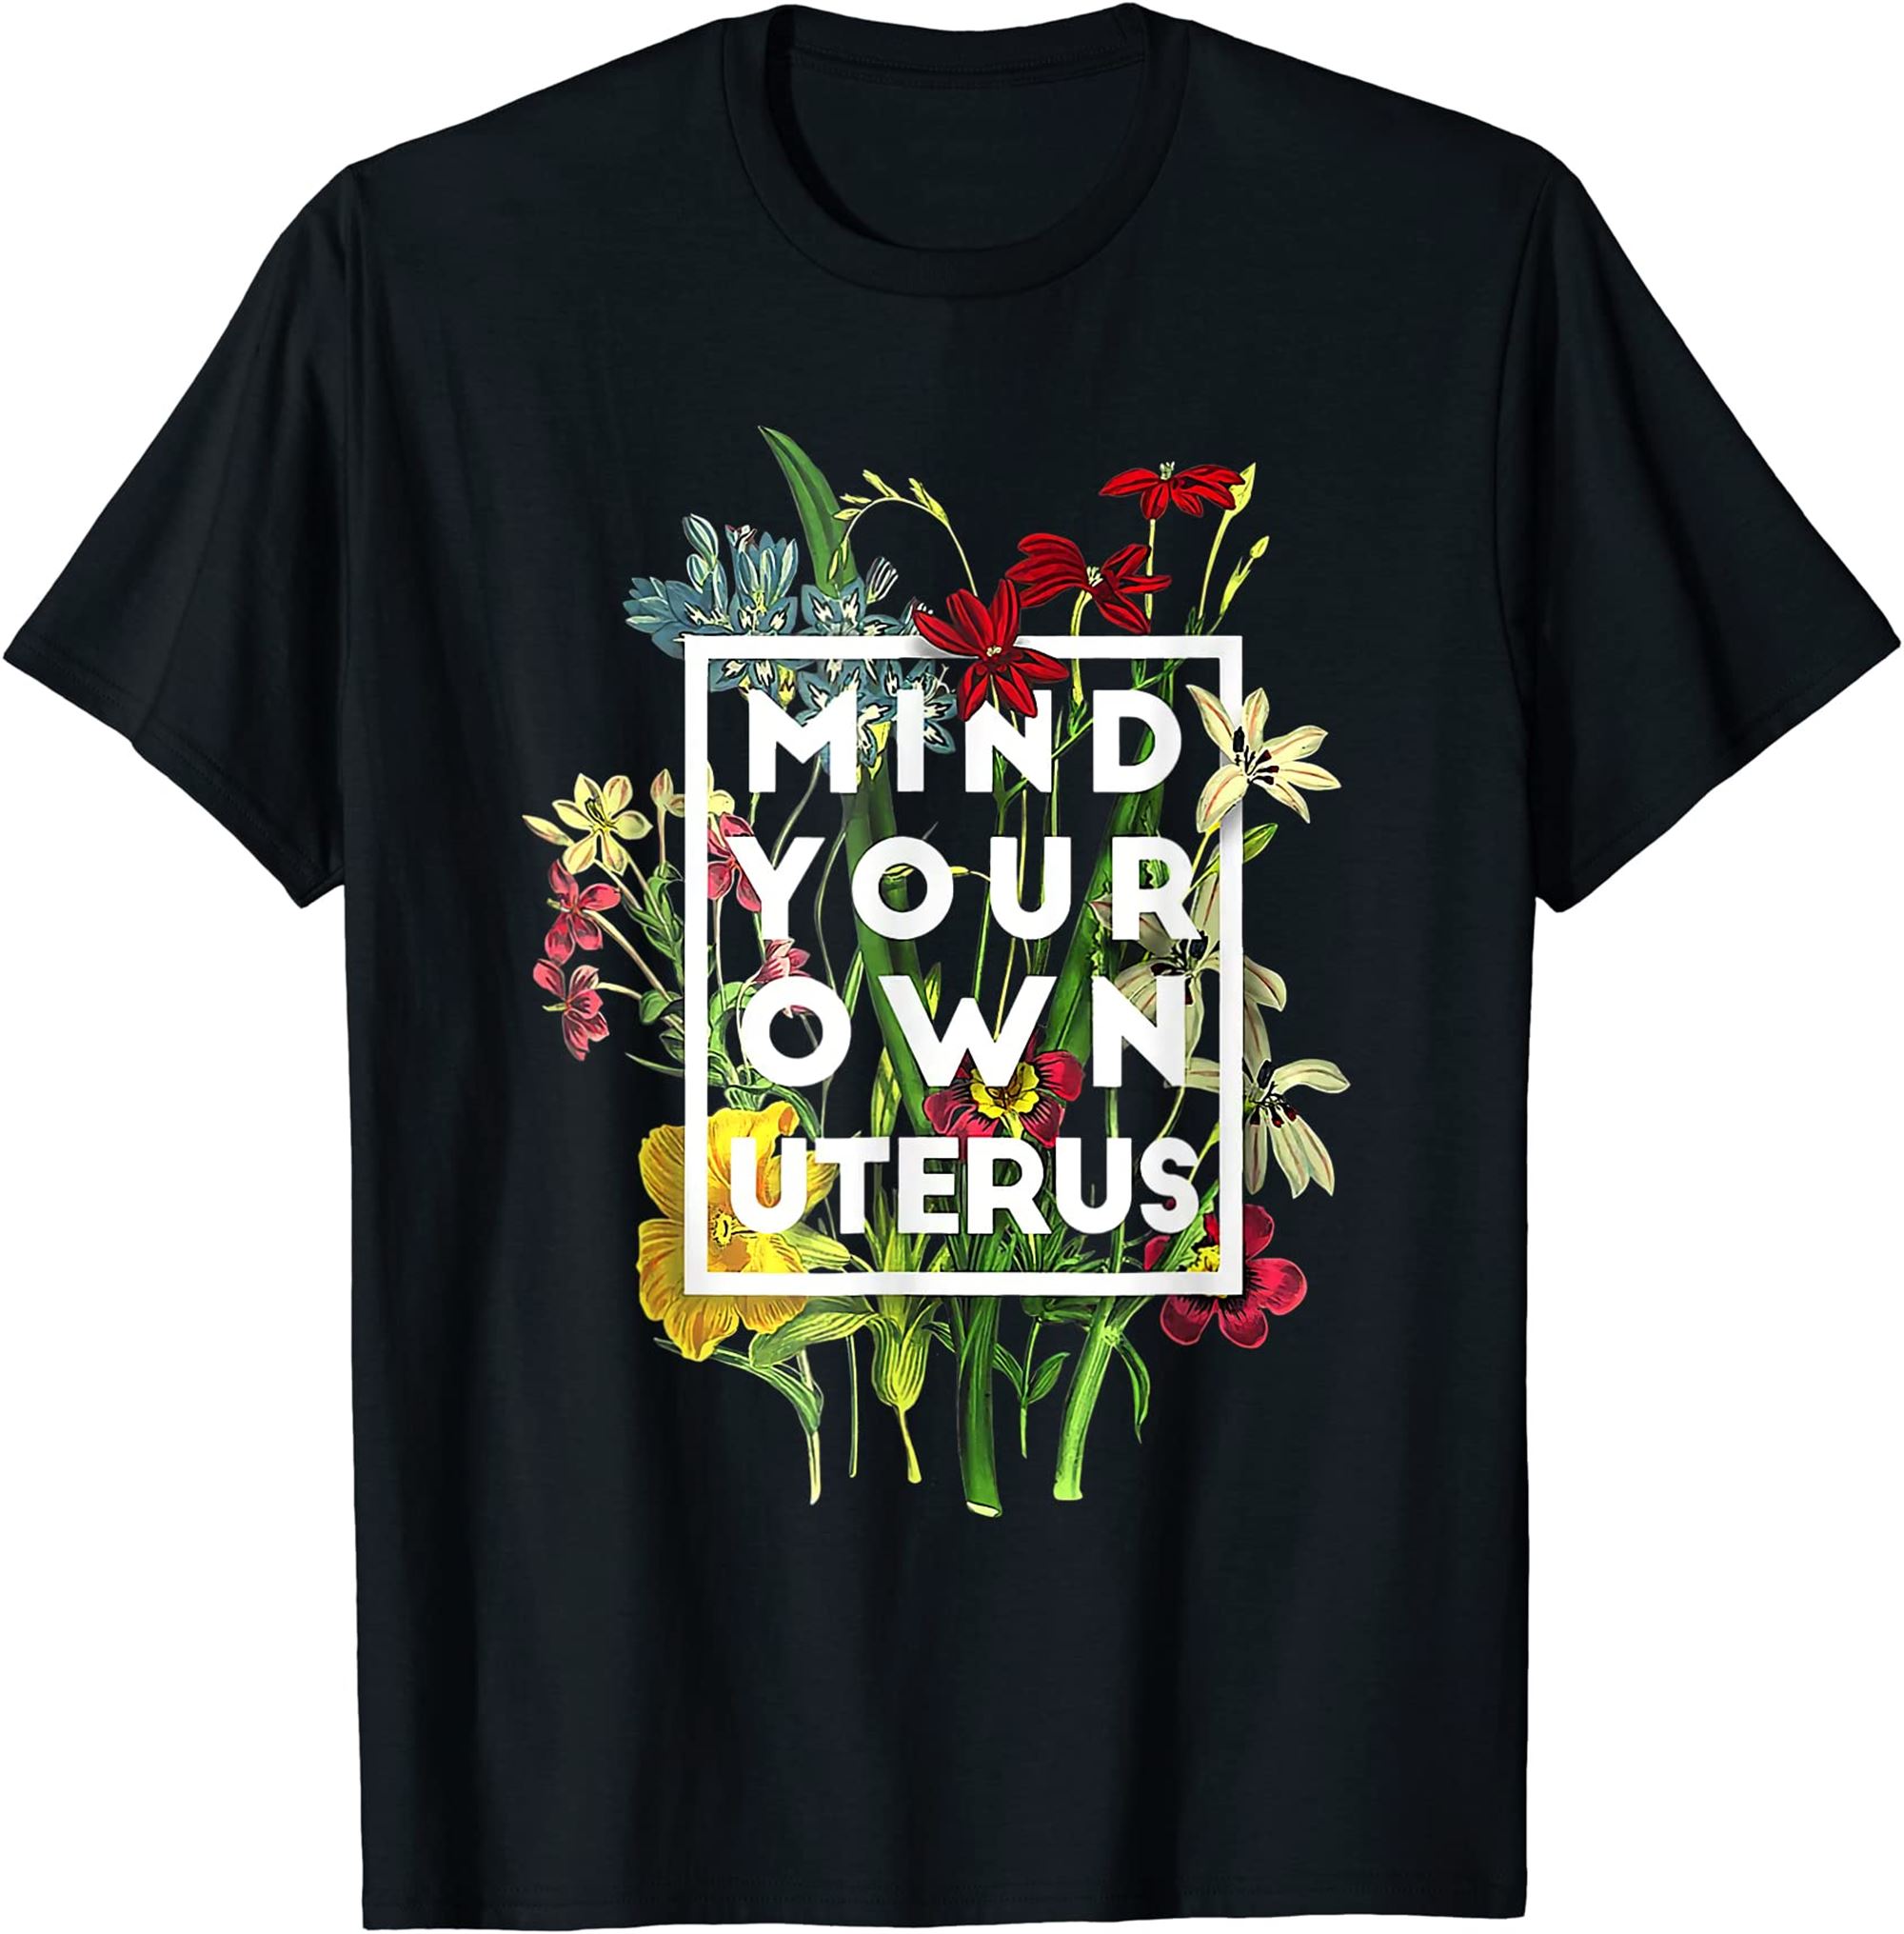 My Body Choice Mind Your Own Uterus Shirt Floral My Uterus T-shirt Full Size Up To 5xl